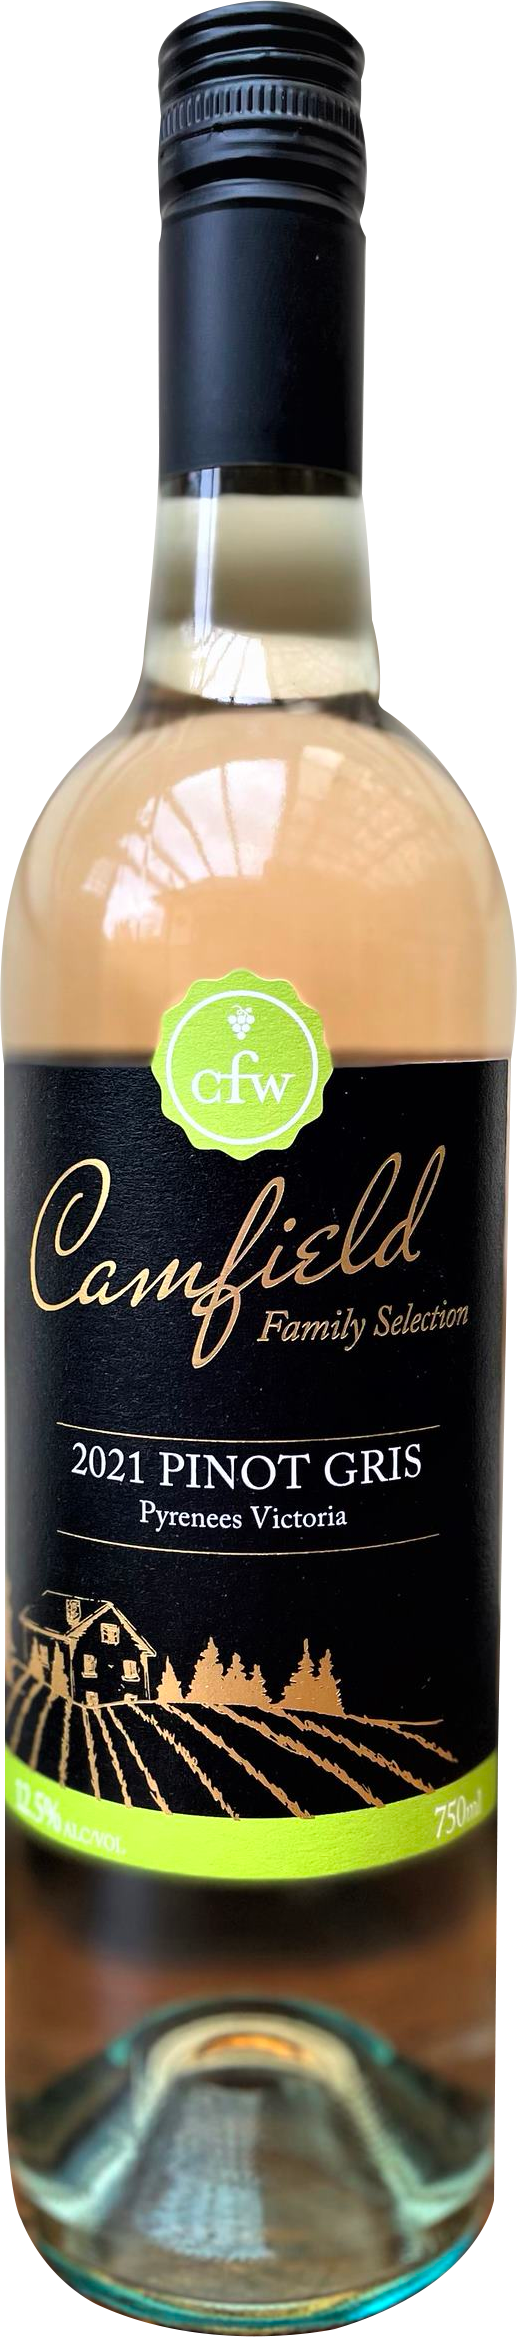 Camfield Family Selection-Pinot Gris 2021